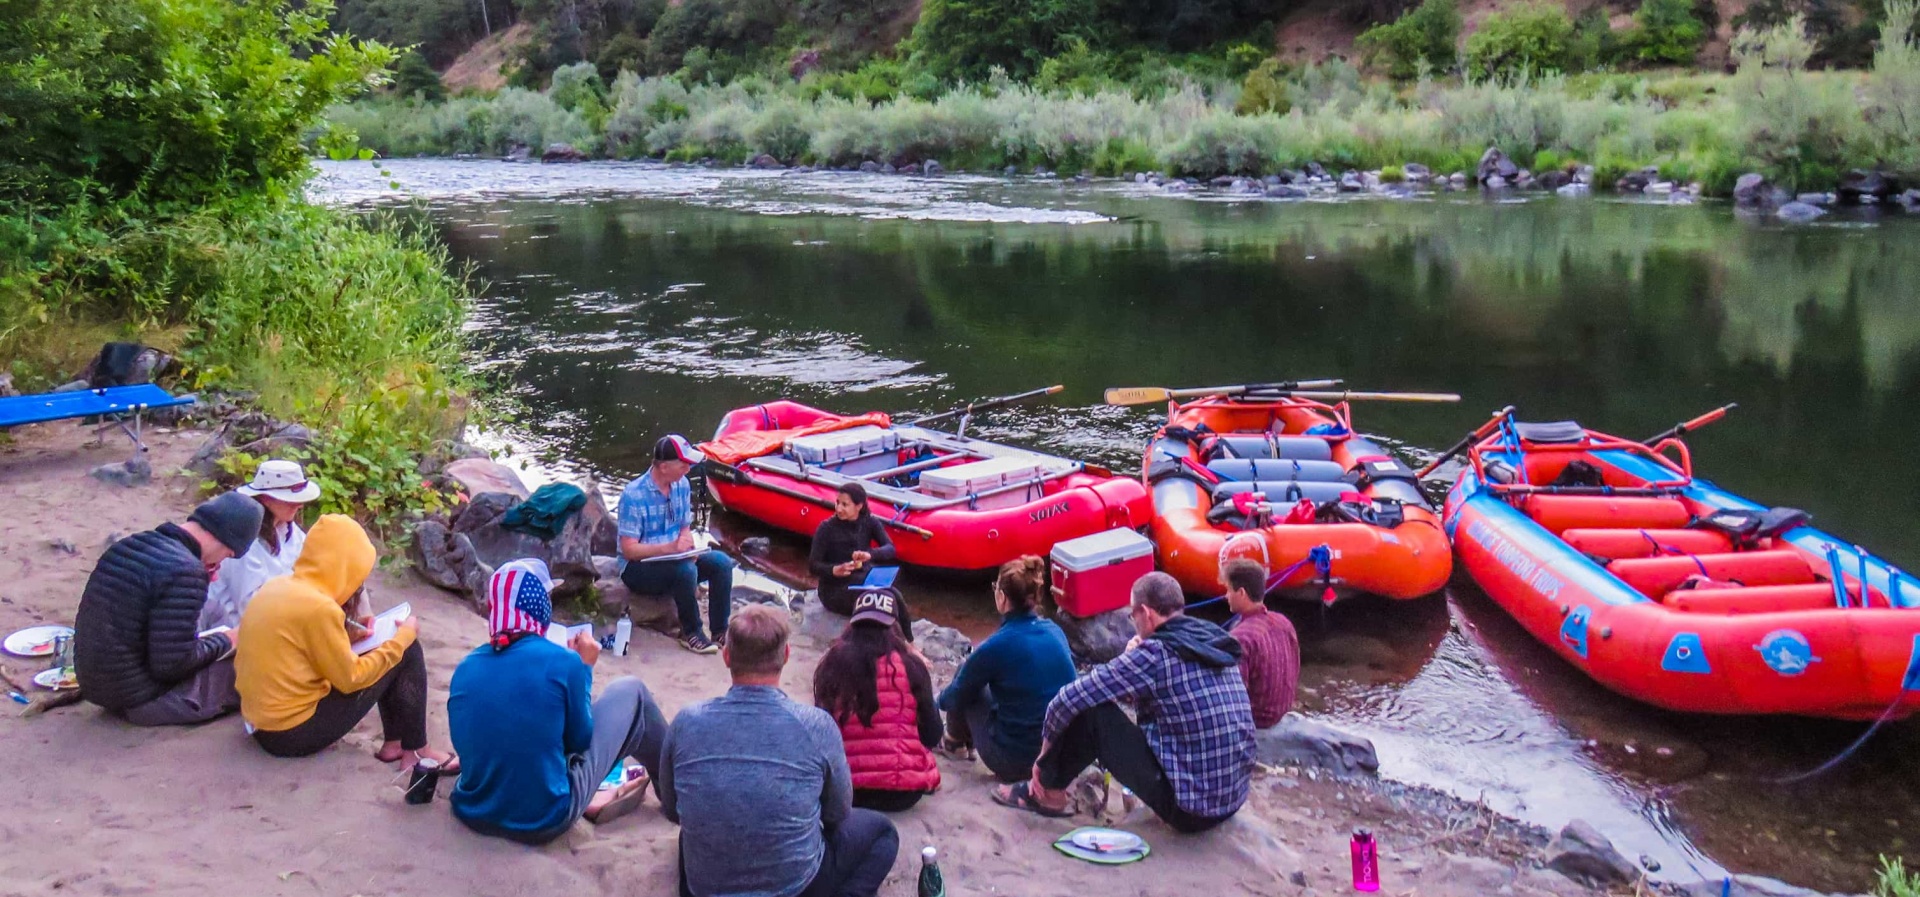 Team building on the Rogue River